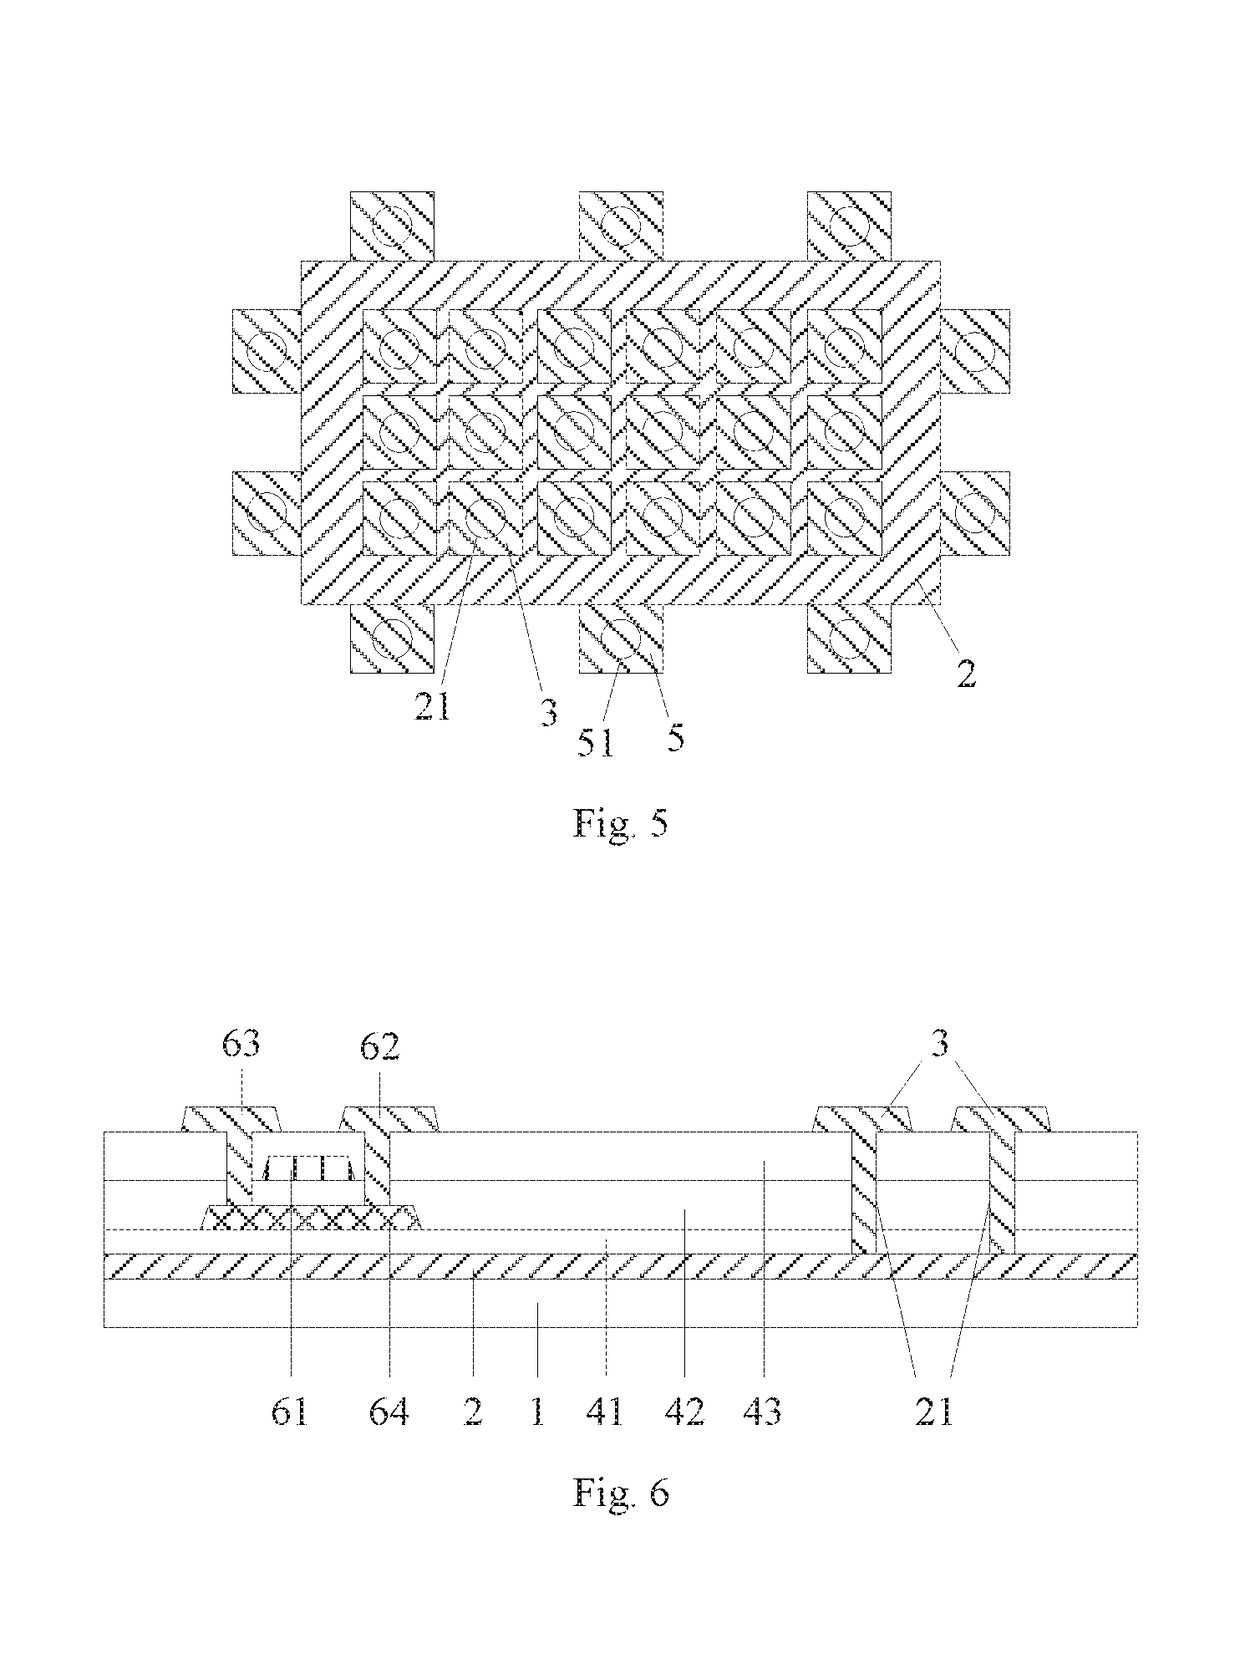 AMOLED display device and array substrate thereof